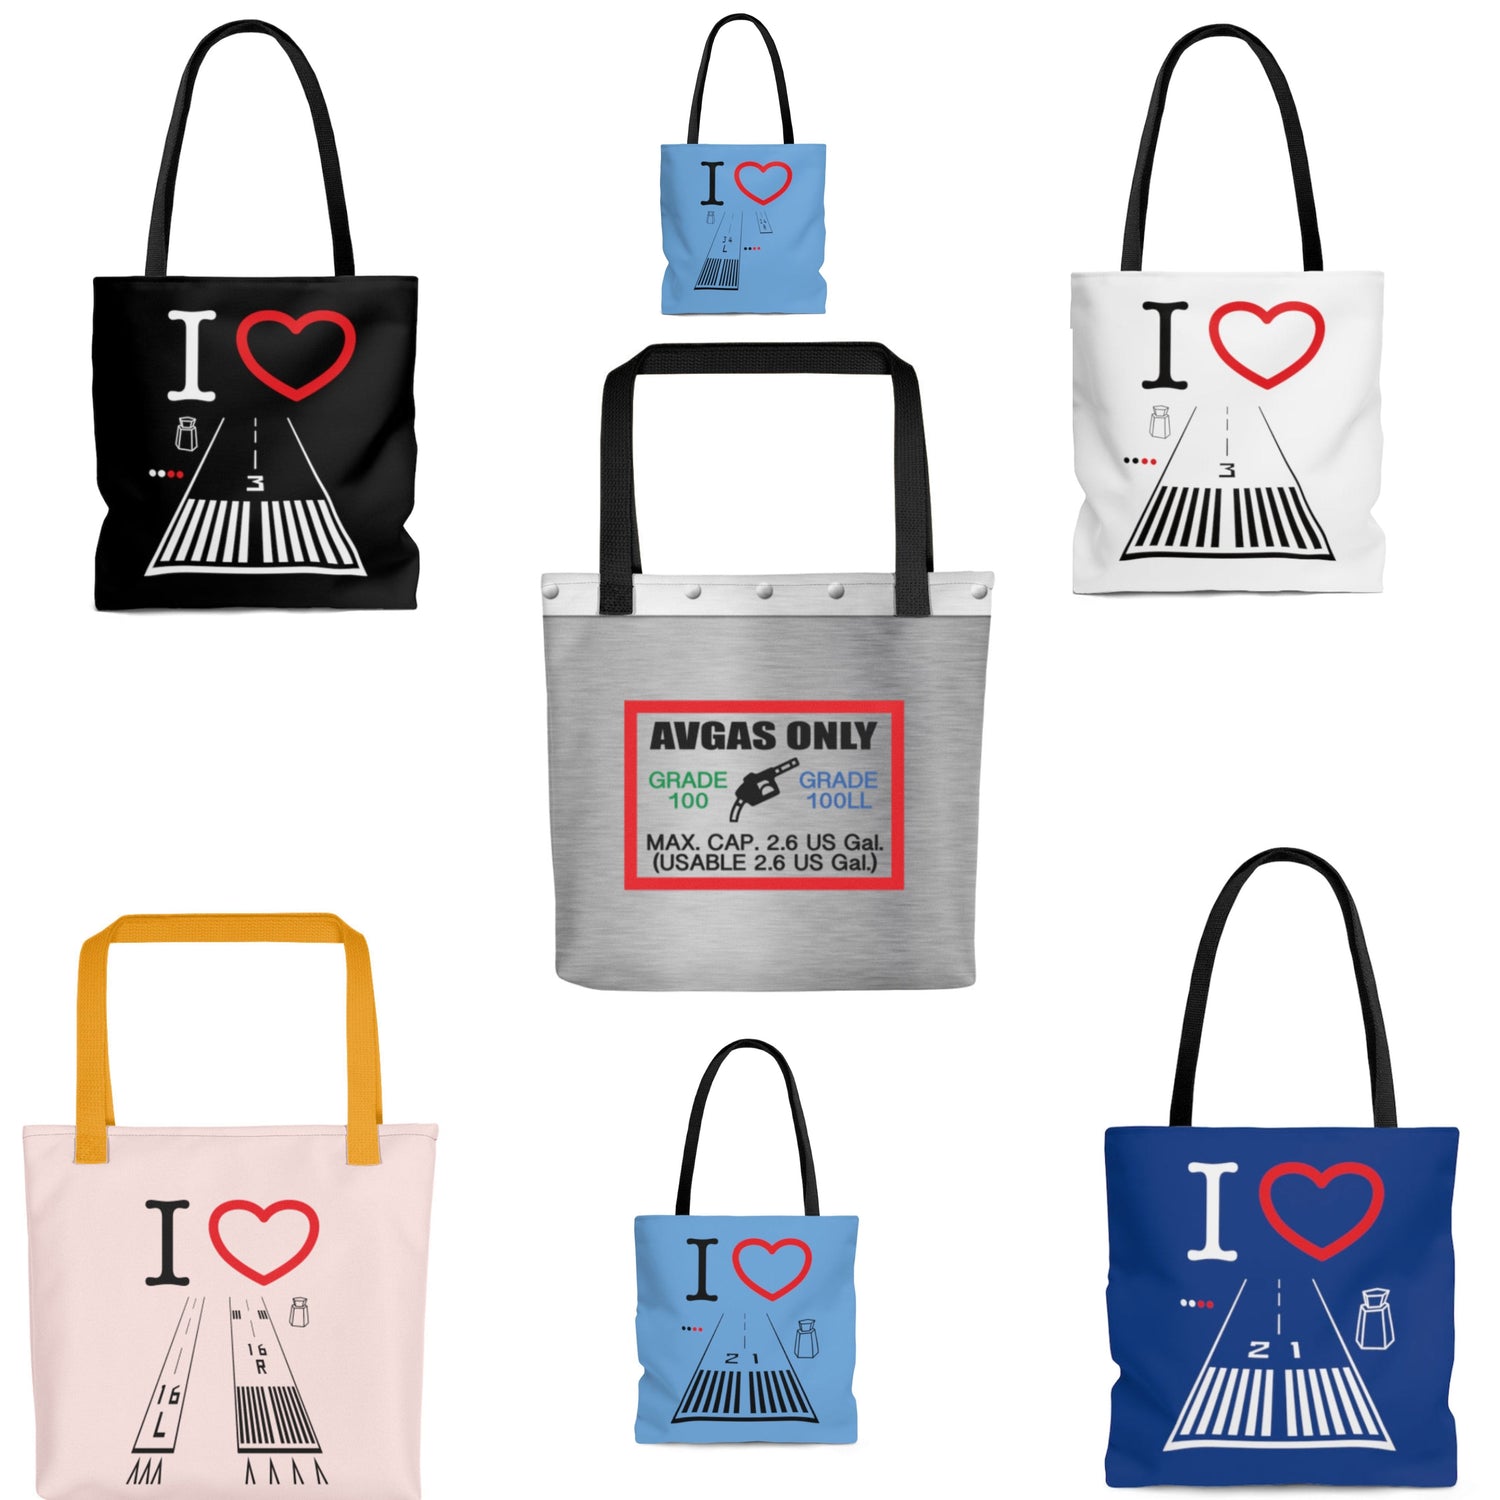 Aviation themed colorful polyester tote bags in three sizes